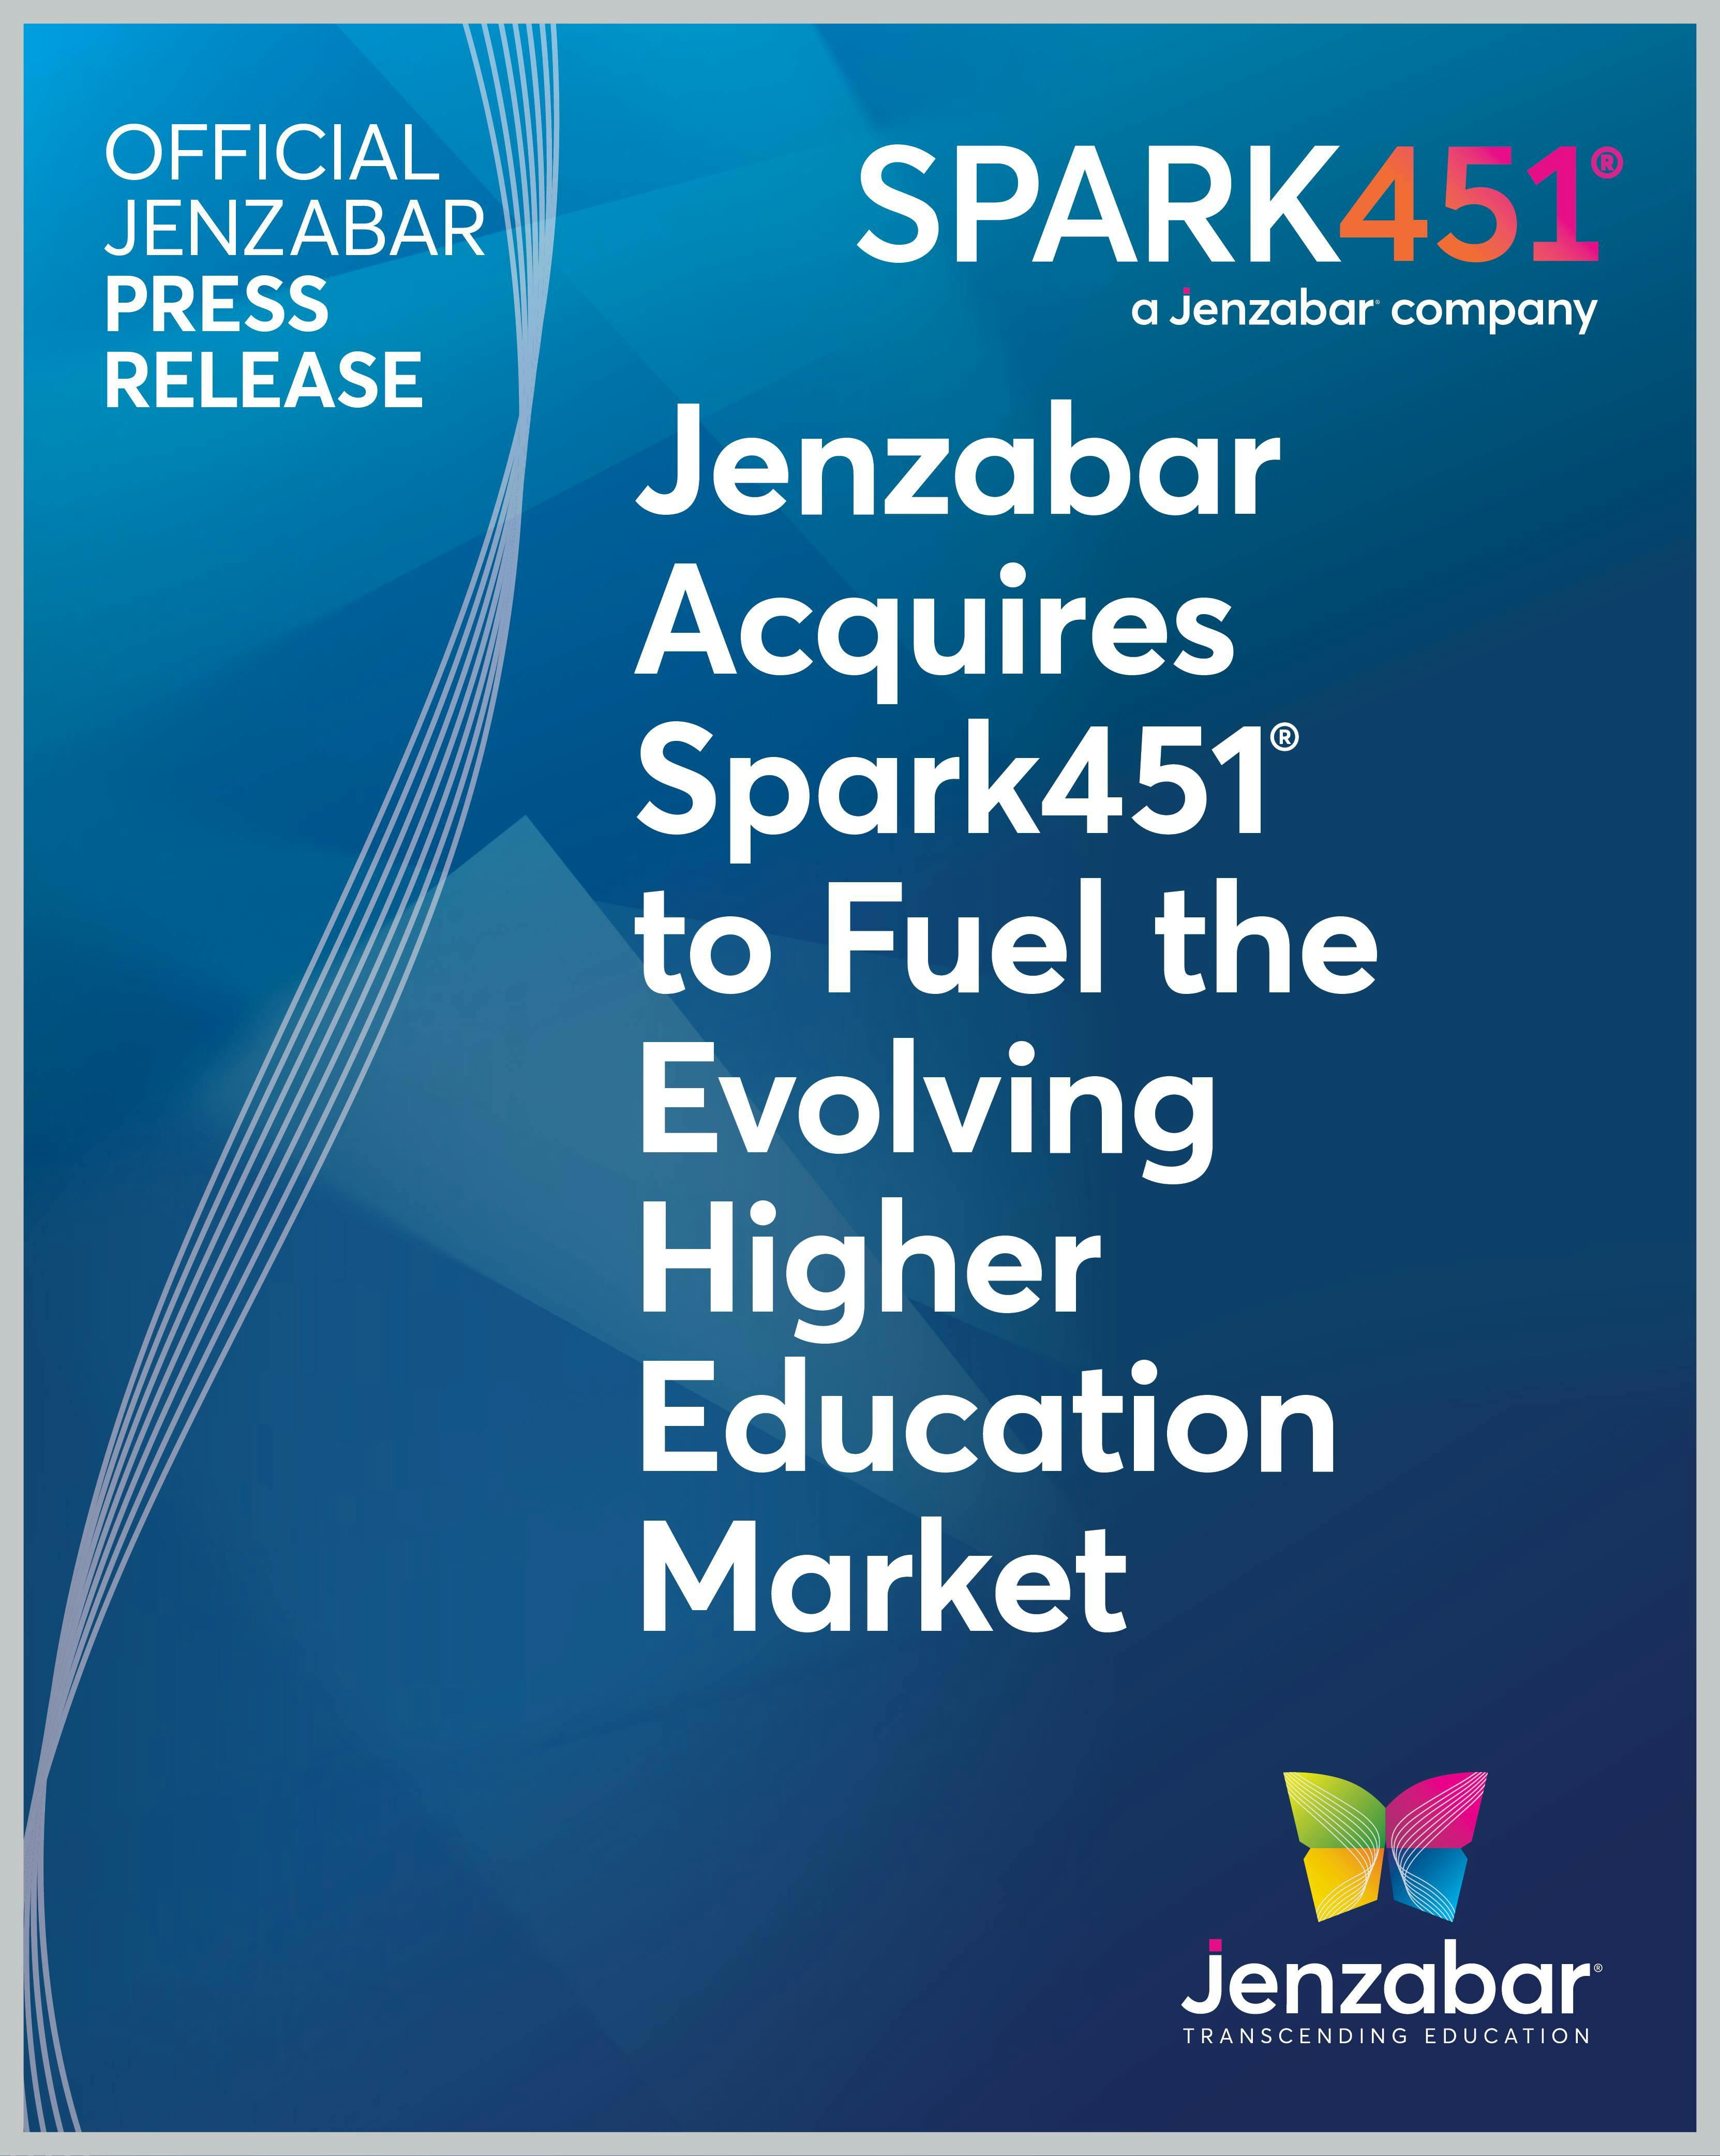 Press Release: Jenzabar Acquires Spark451